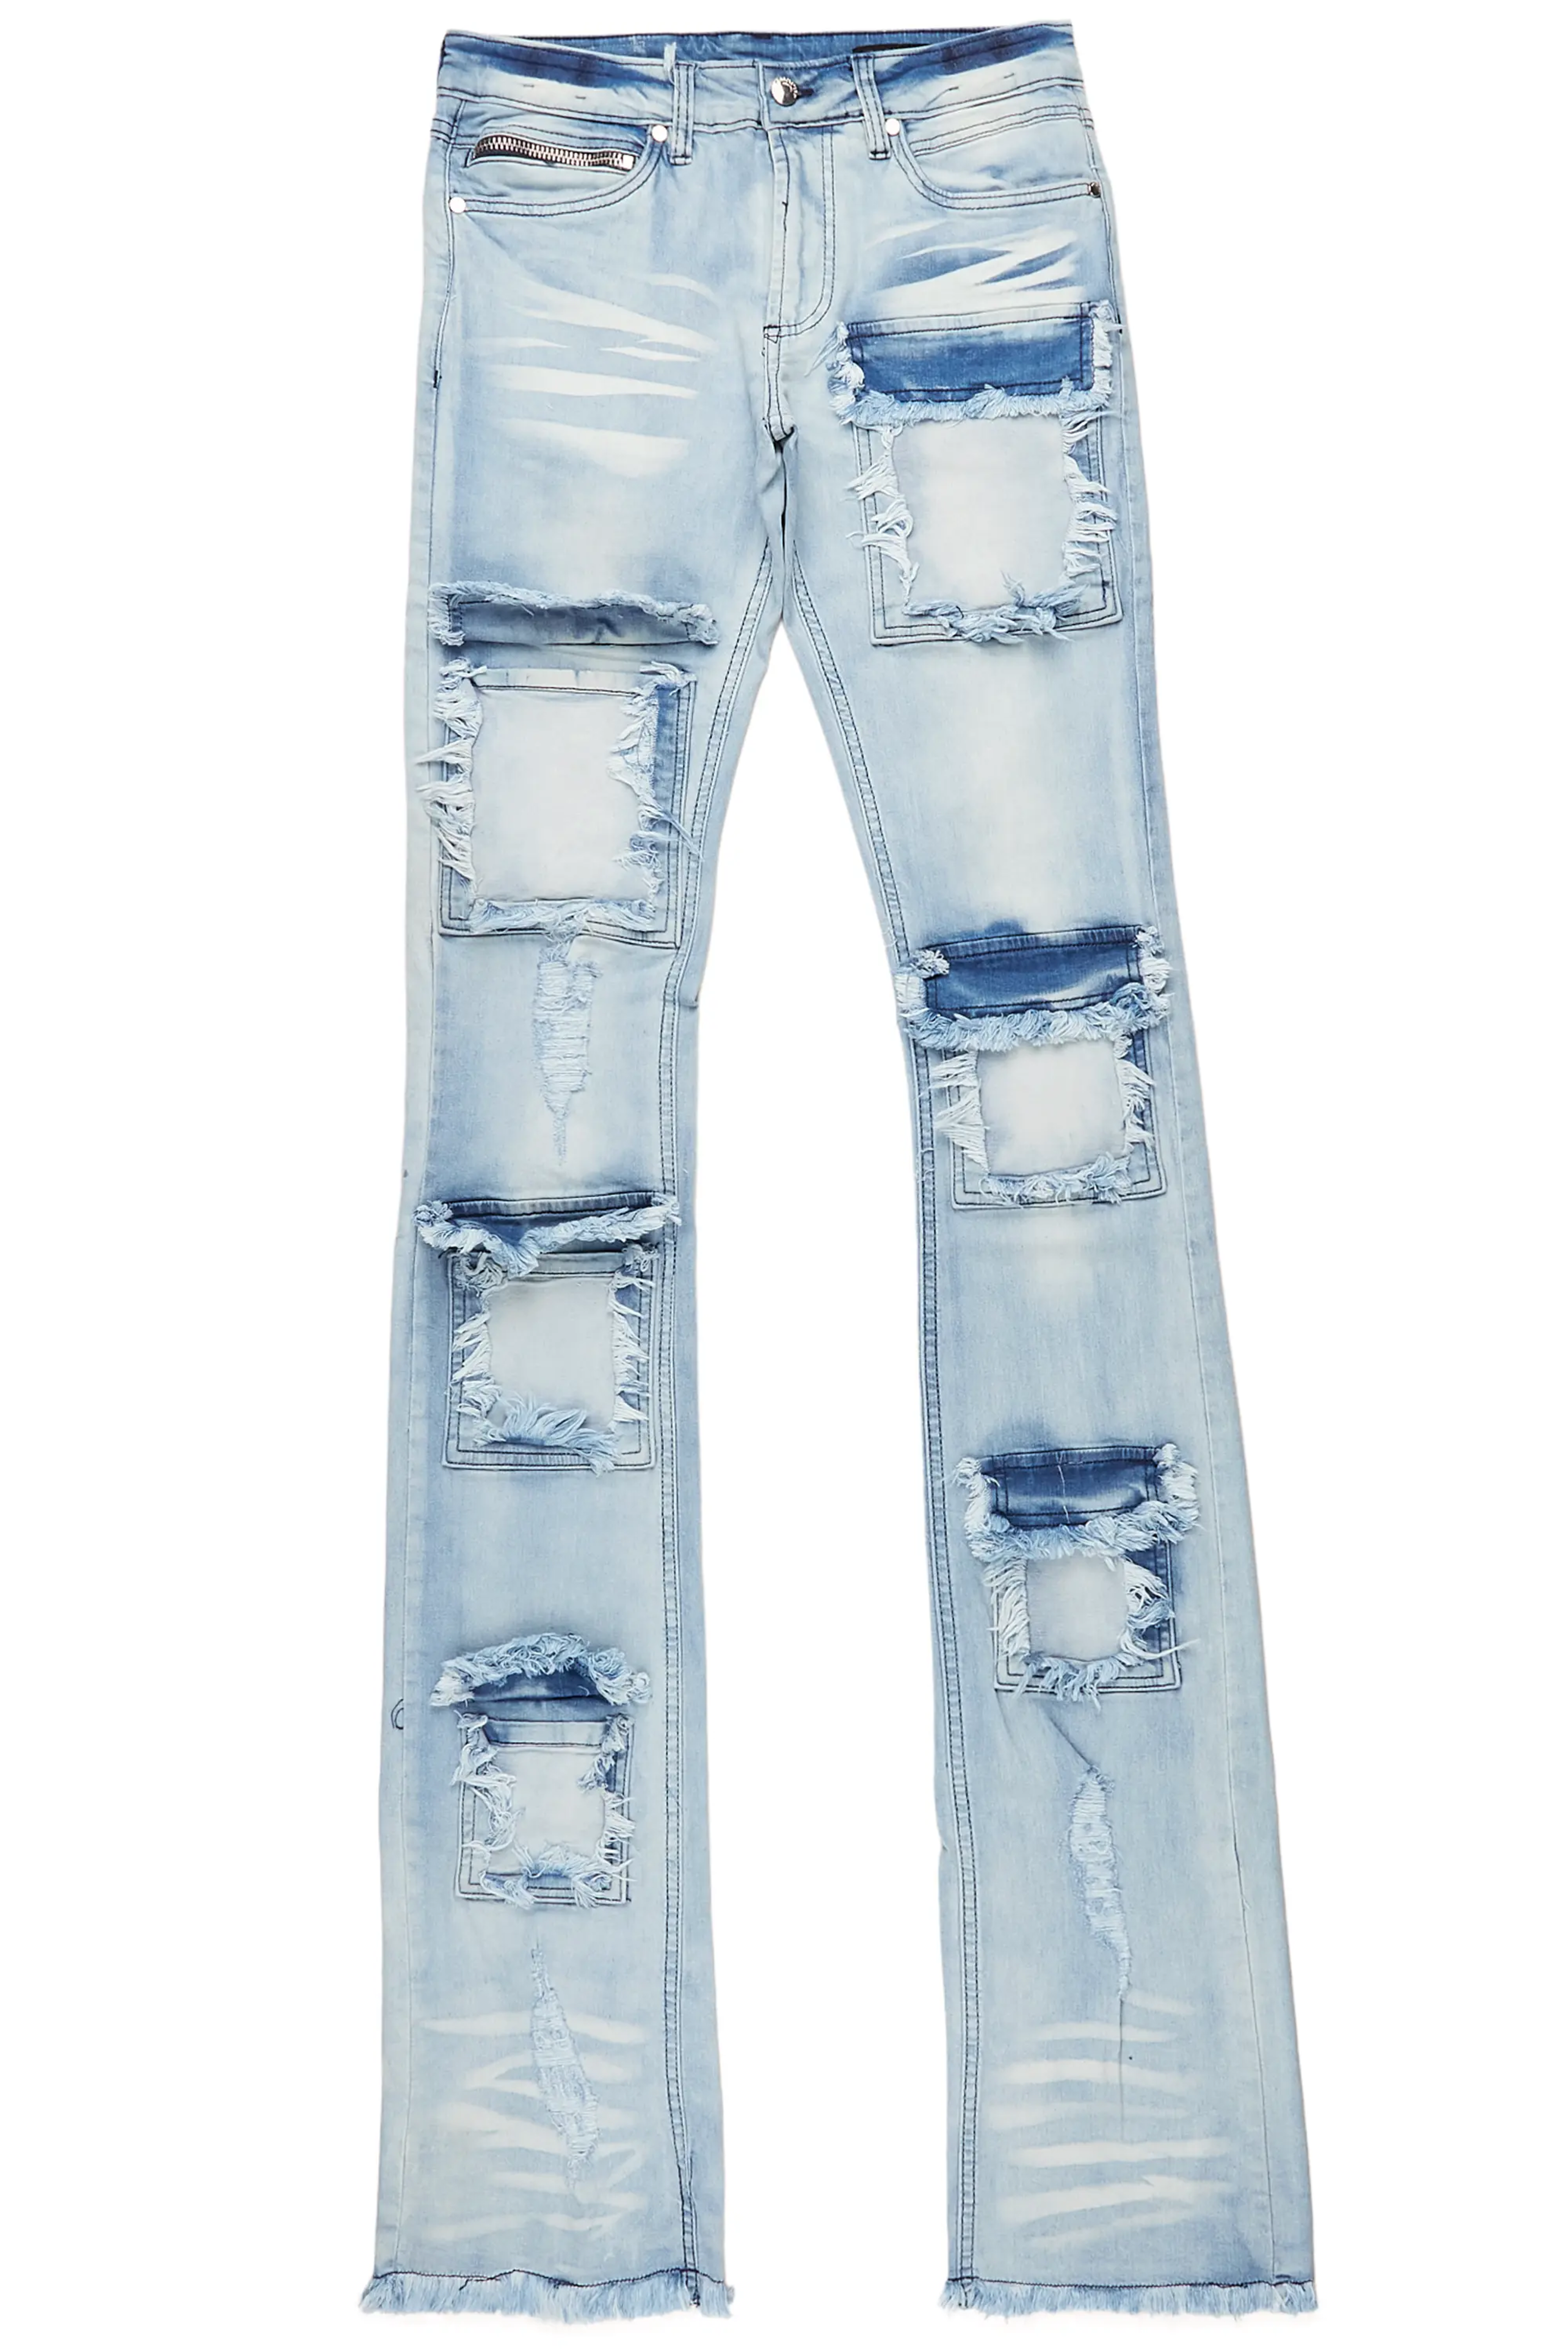 Alternate View 1 of Asle Blue Super Stacked Flare Jean